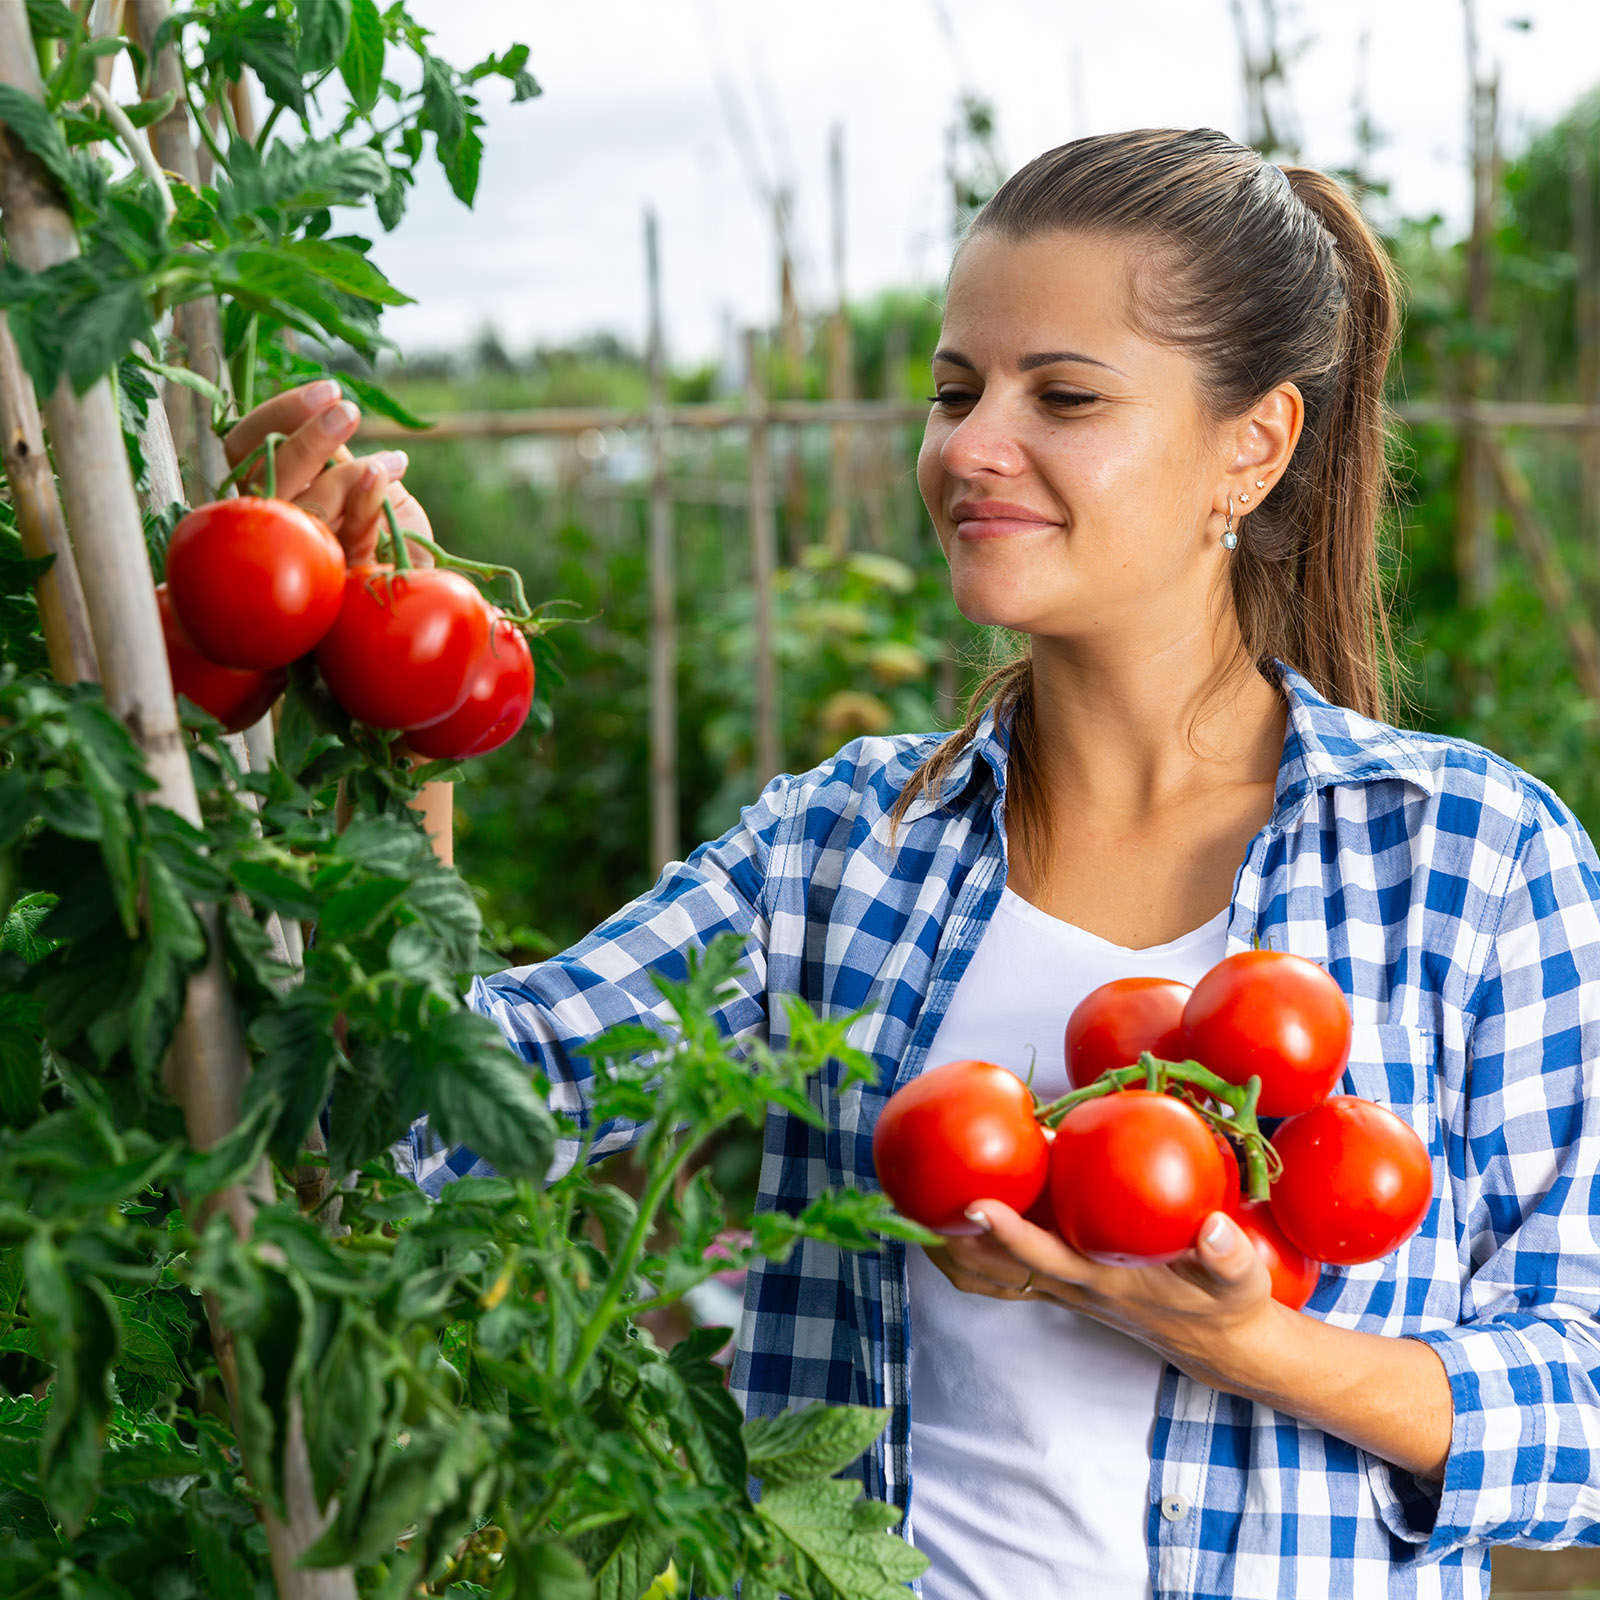 A woman picks fresh tomatoes from the vine.